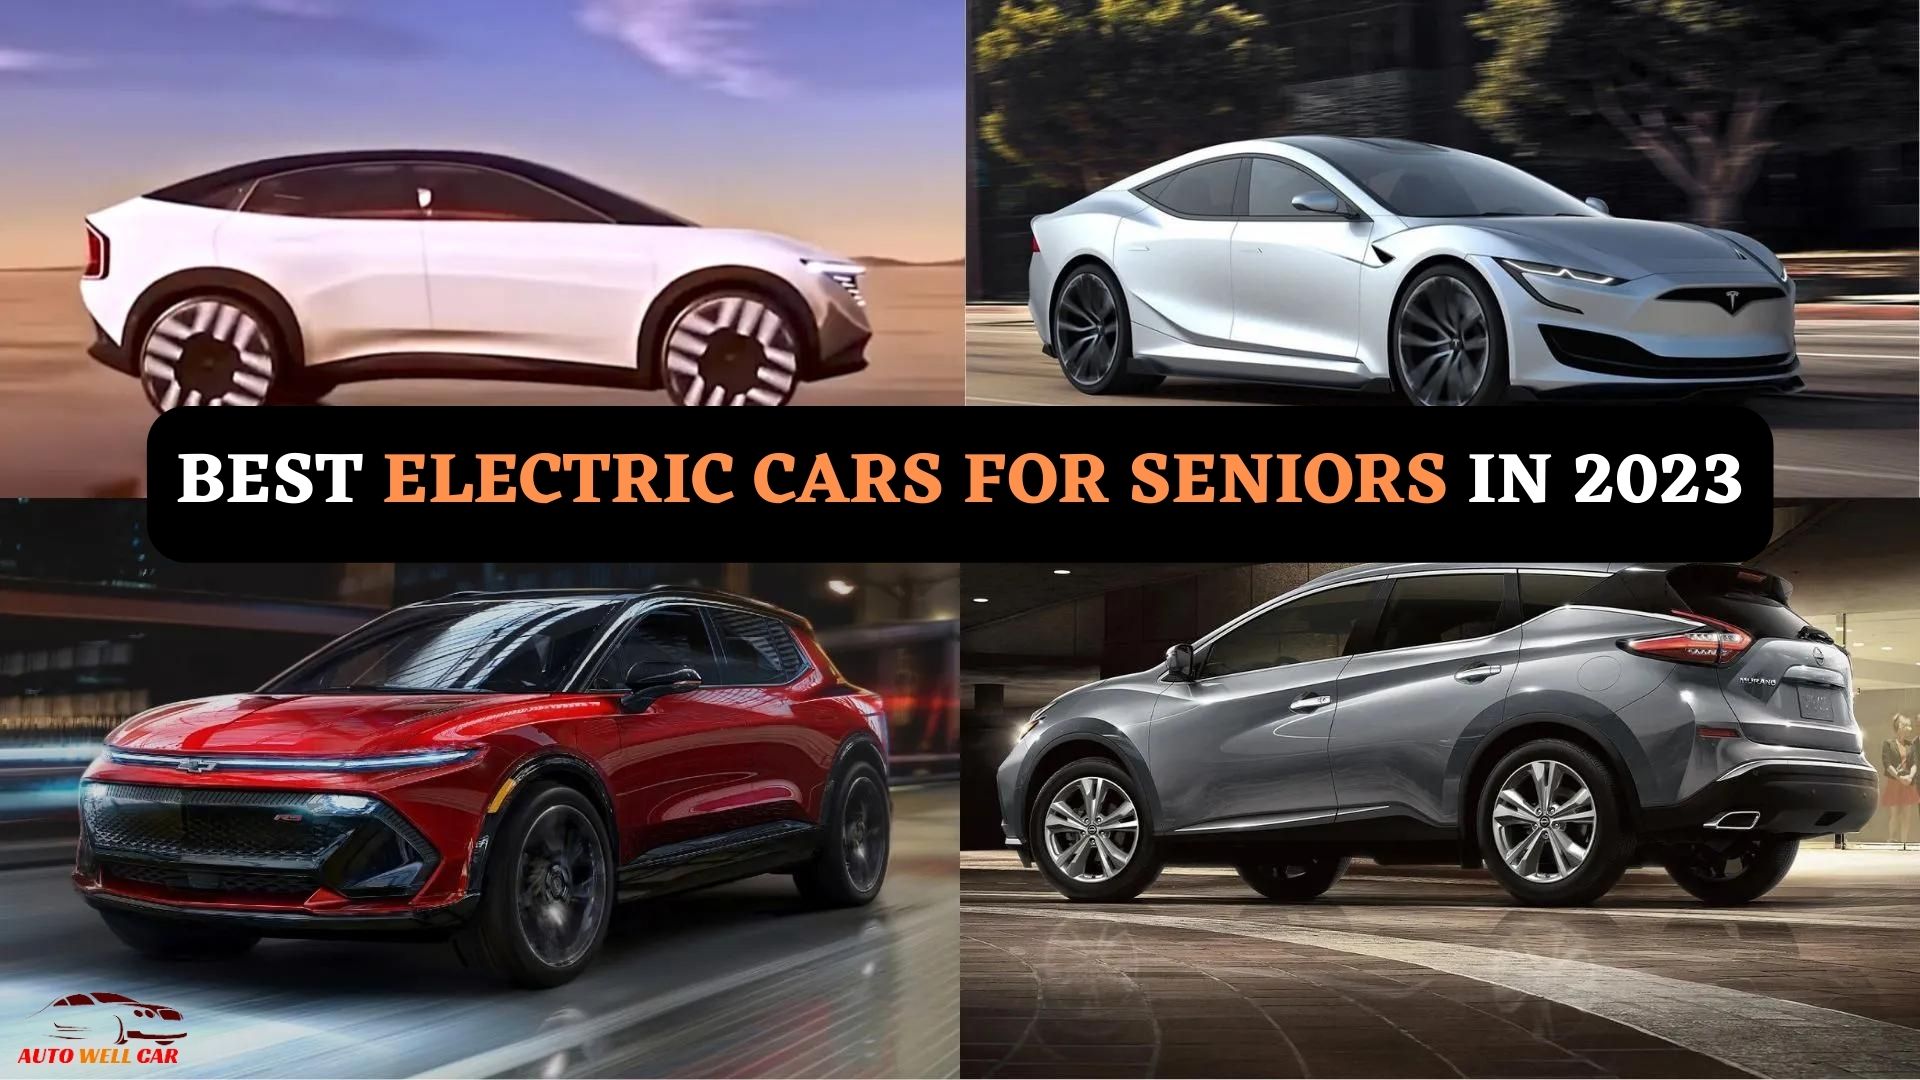 Best Electric Cars for Seniors in 2023